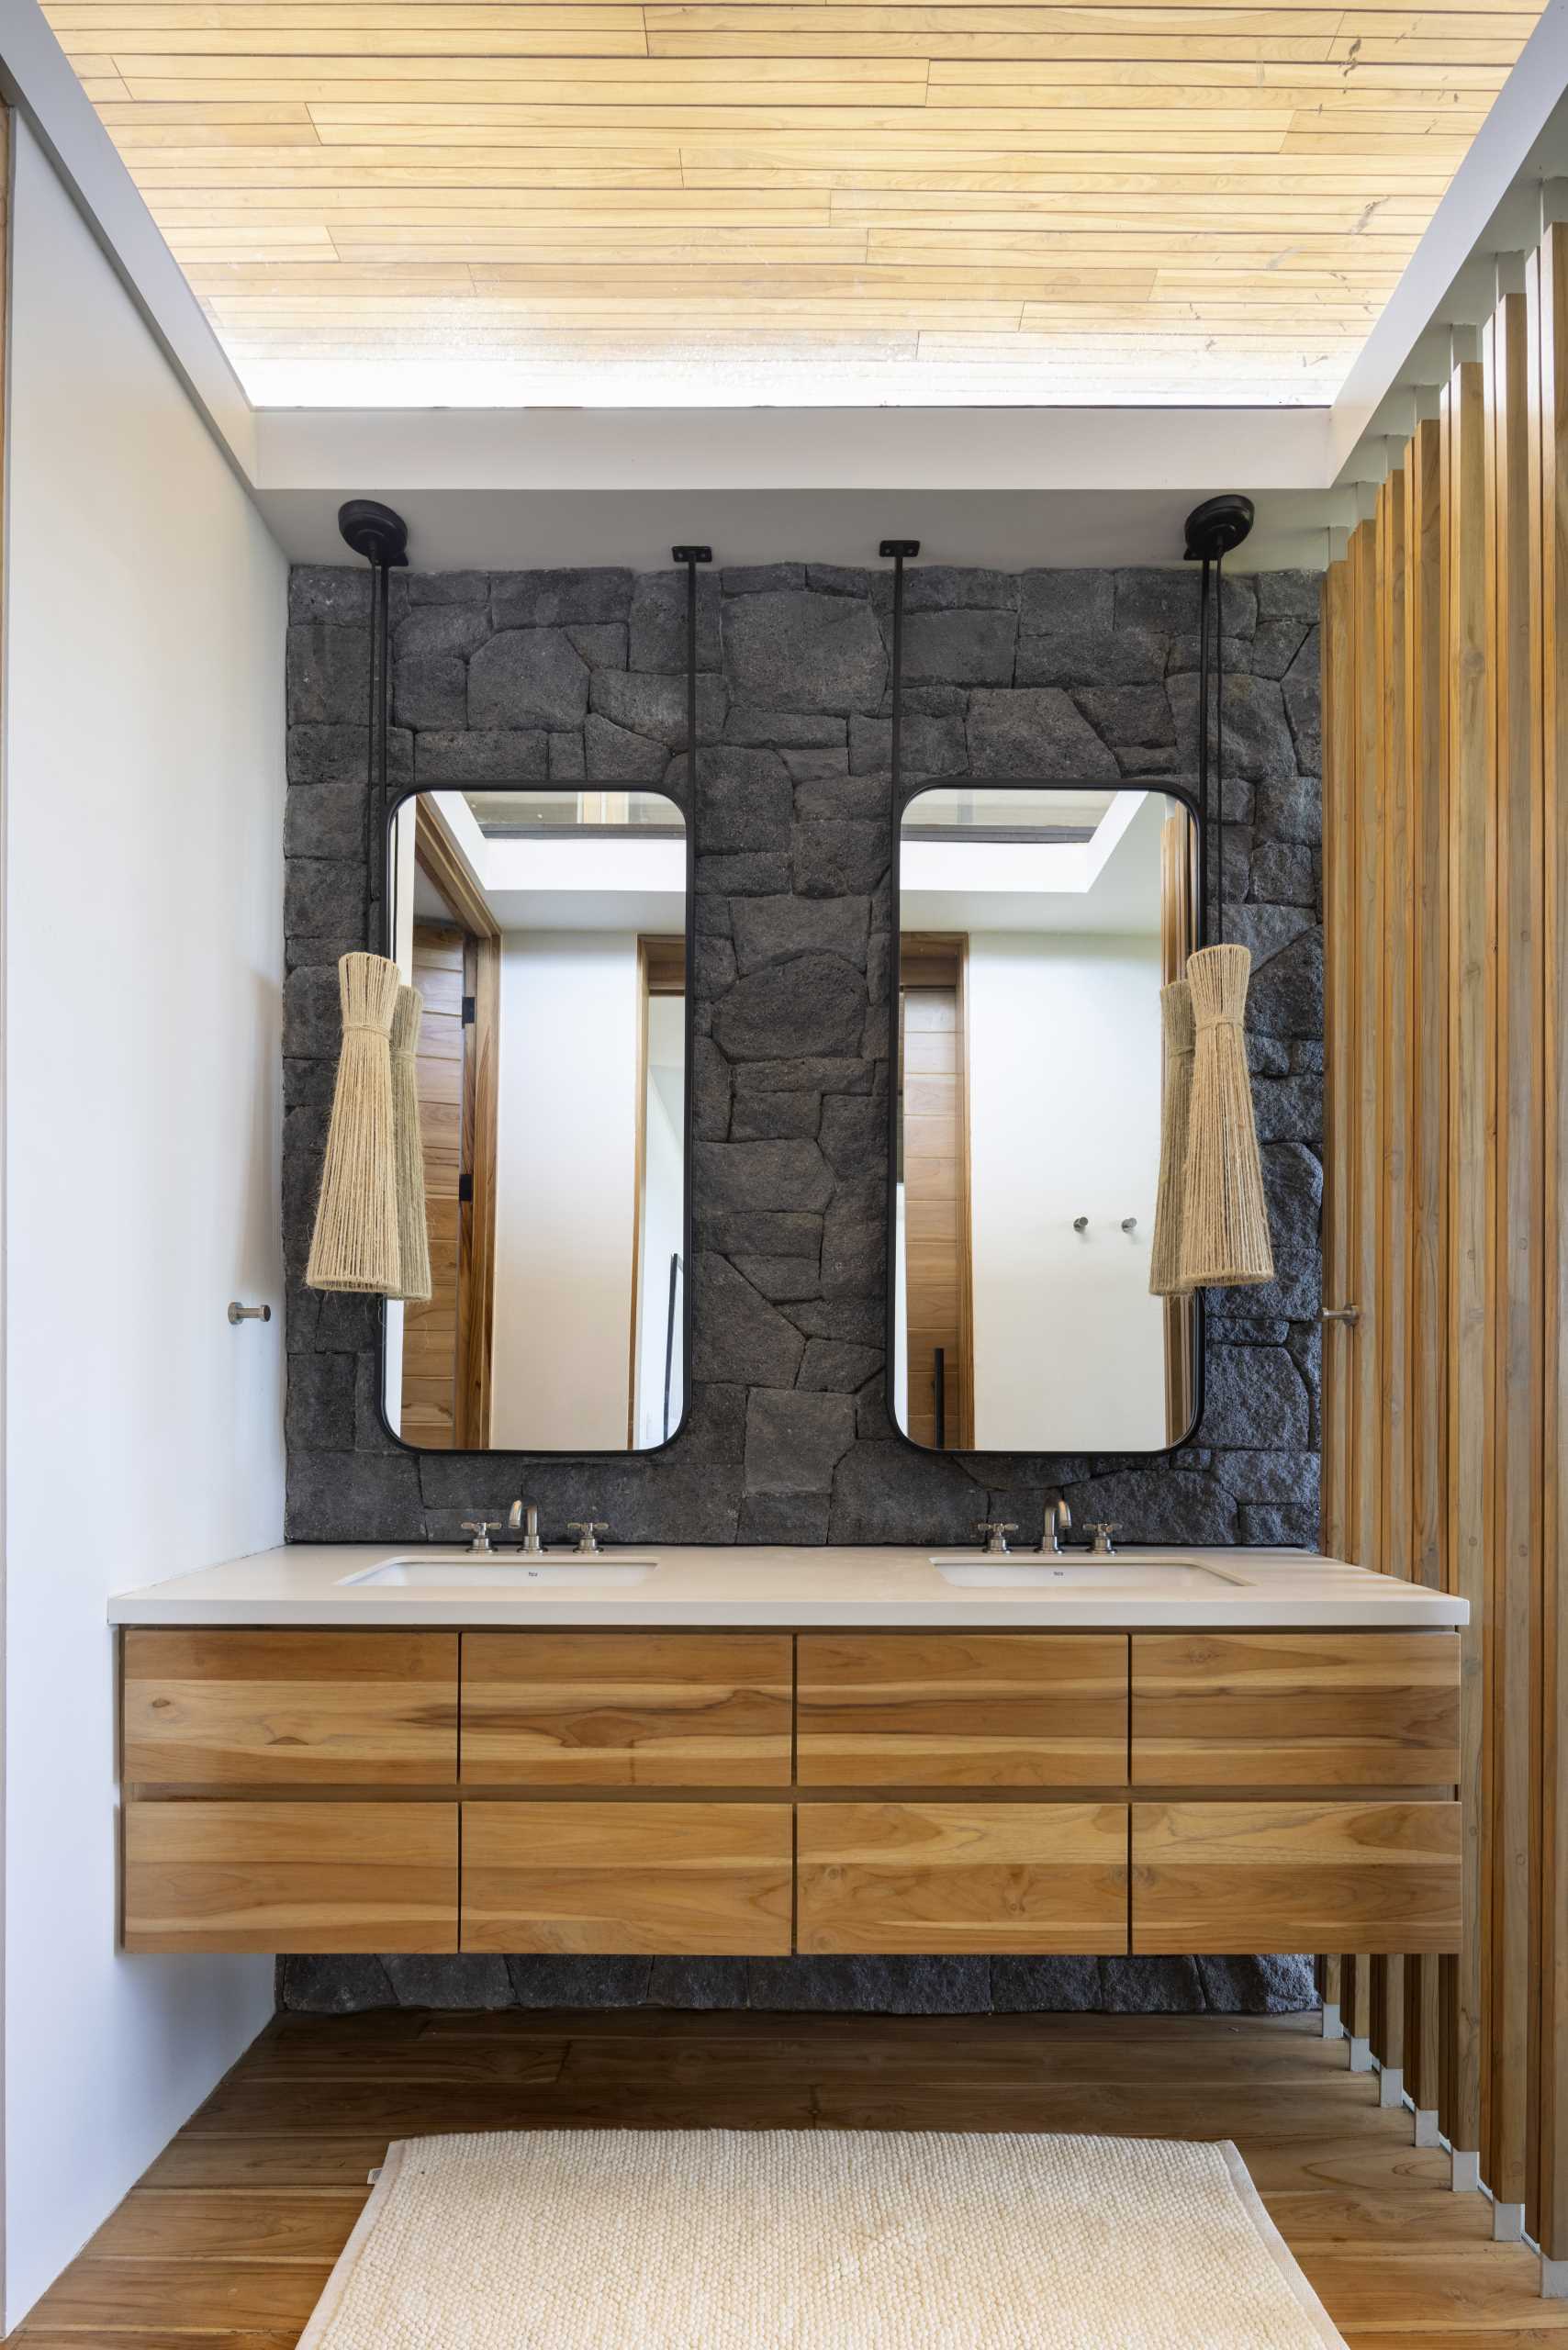 In the bathroom, a grey stone wall provides a backdrop for the wood vanity, mirrors, and pendant lights.